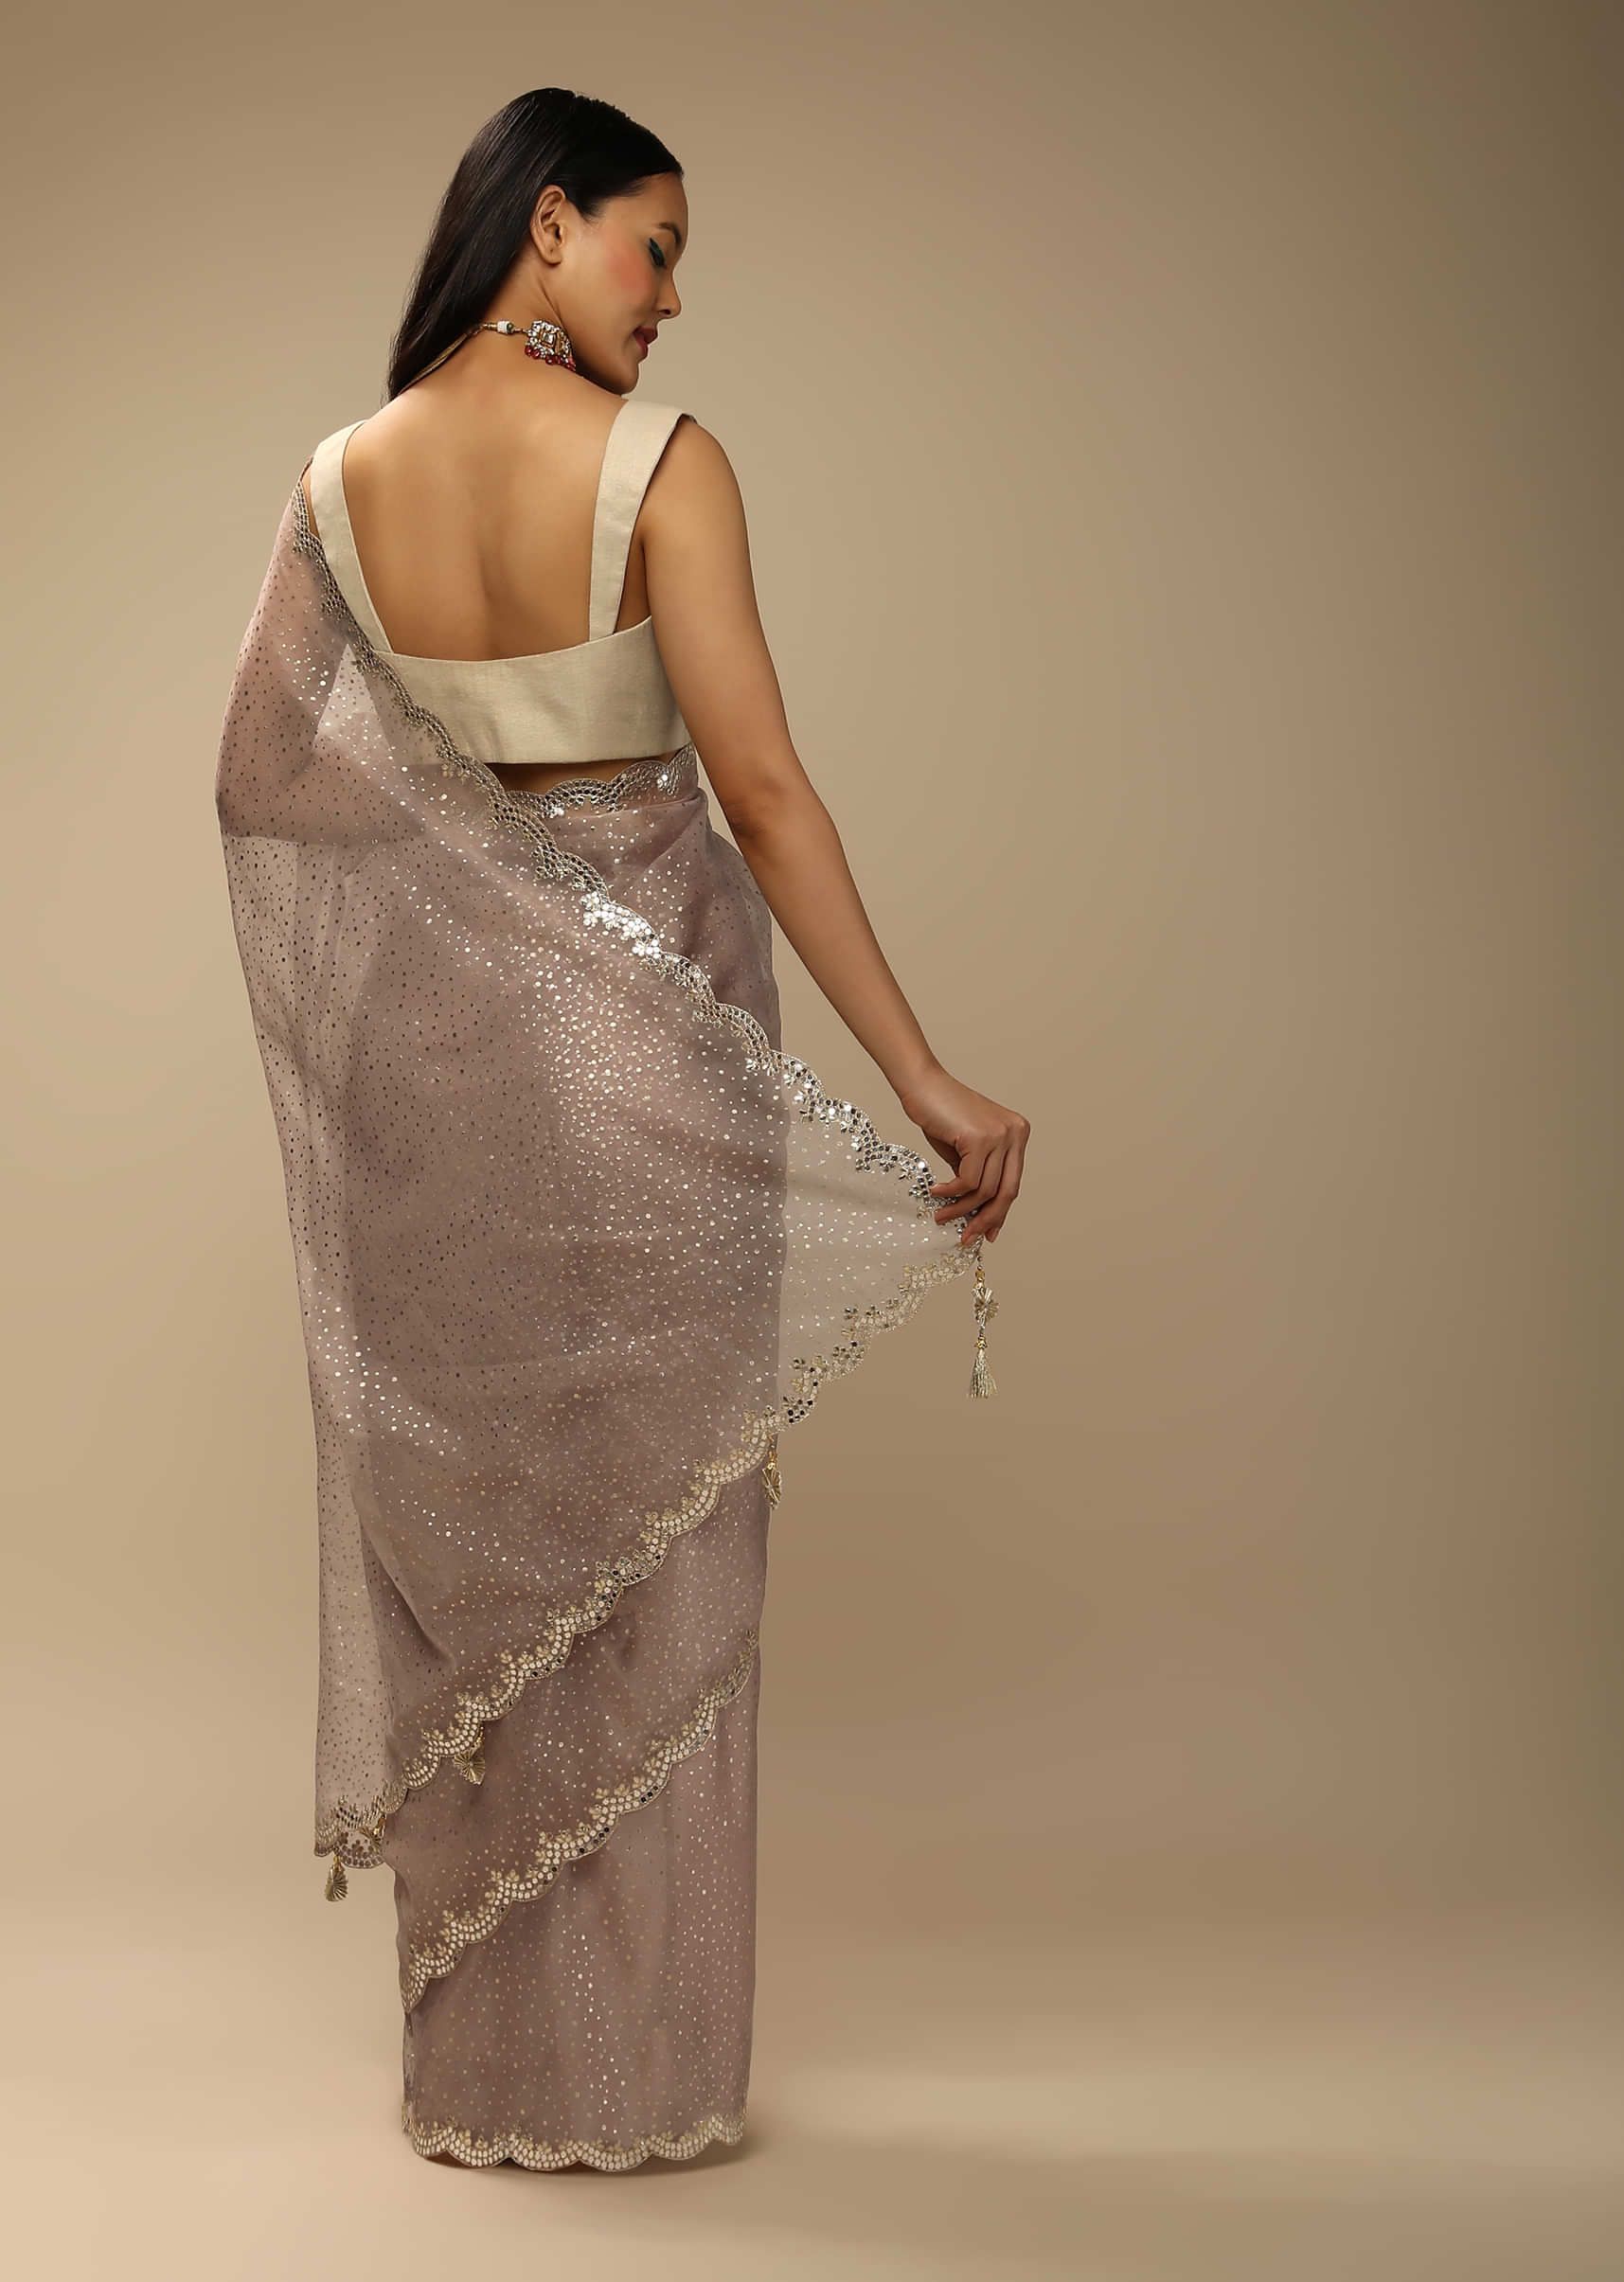 Mushroom Taupe Saree In Organza With Foil Printed Scattered Dots And Mirror Embroidered Scallop Border